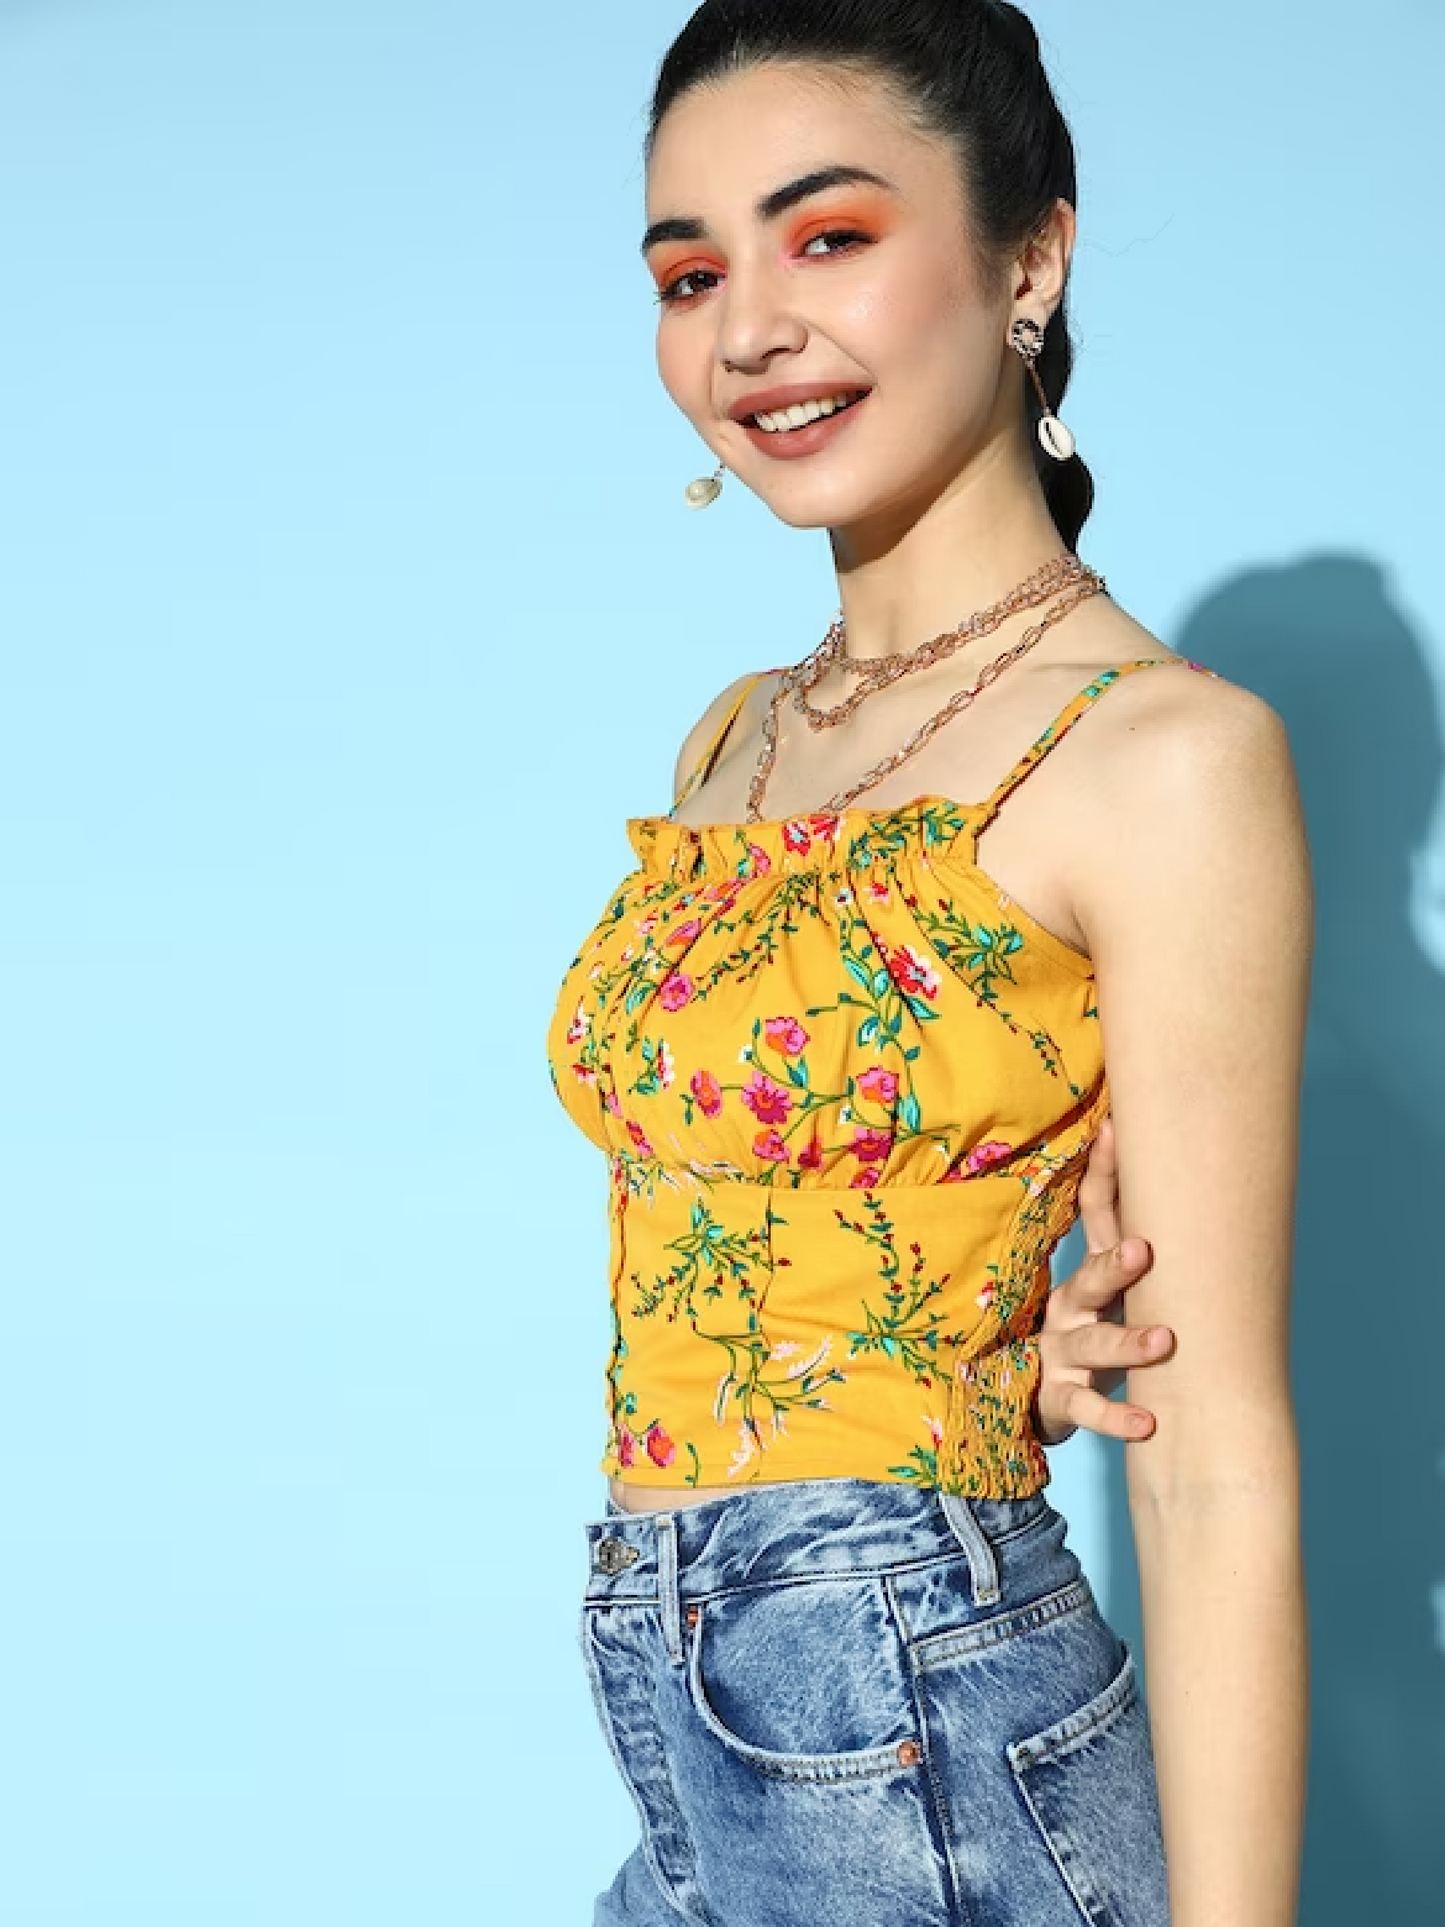 Berrylush - Twisted Crop Top - Floral Frilled Top - Yellow - b2bf6d01-69db-4adf-8db9-5d867920be8a1646198560019-UF-Women-Tops-7841646198559571-4